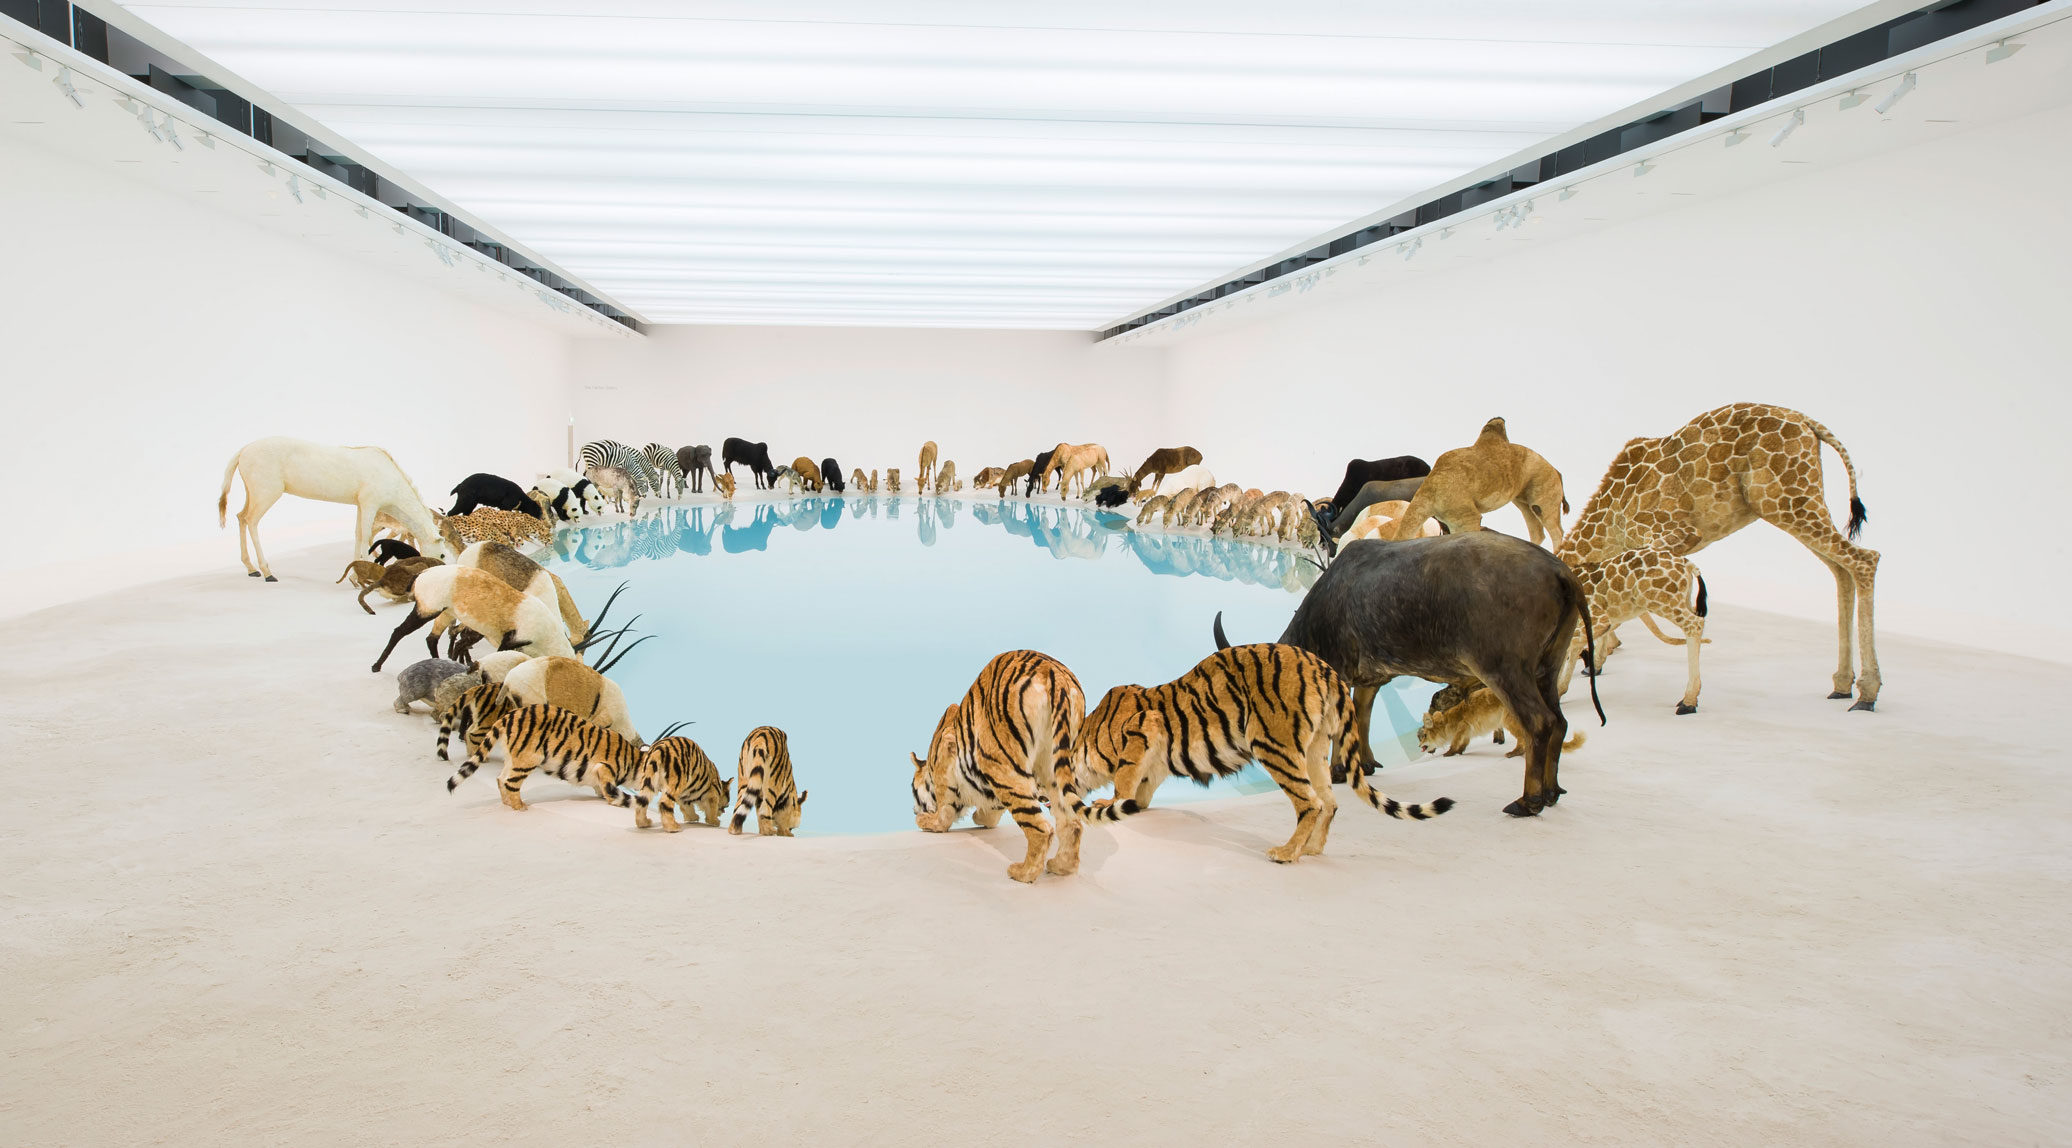 Heritage, 2013 - Cai Guo Qiang - Installation view, Queensland Gallery of Modern Art, Brisbane, 2013. As featured in our book Animal: Exploring the Zoological World